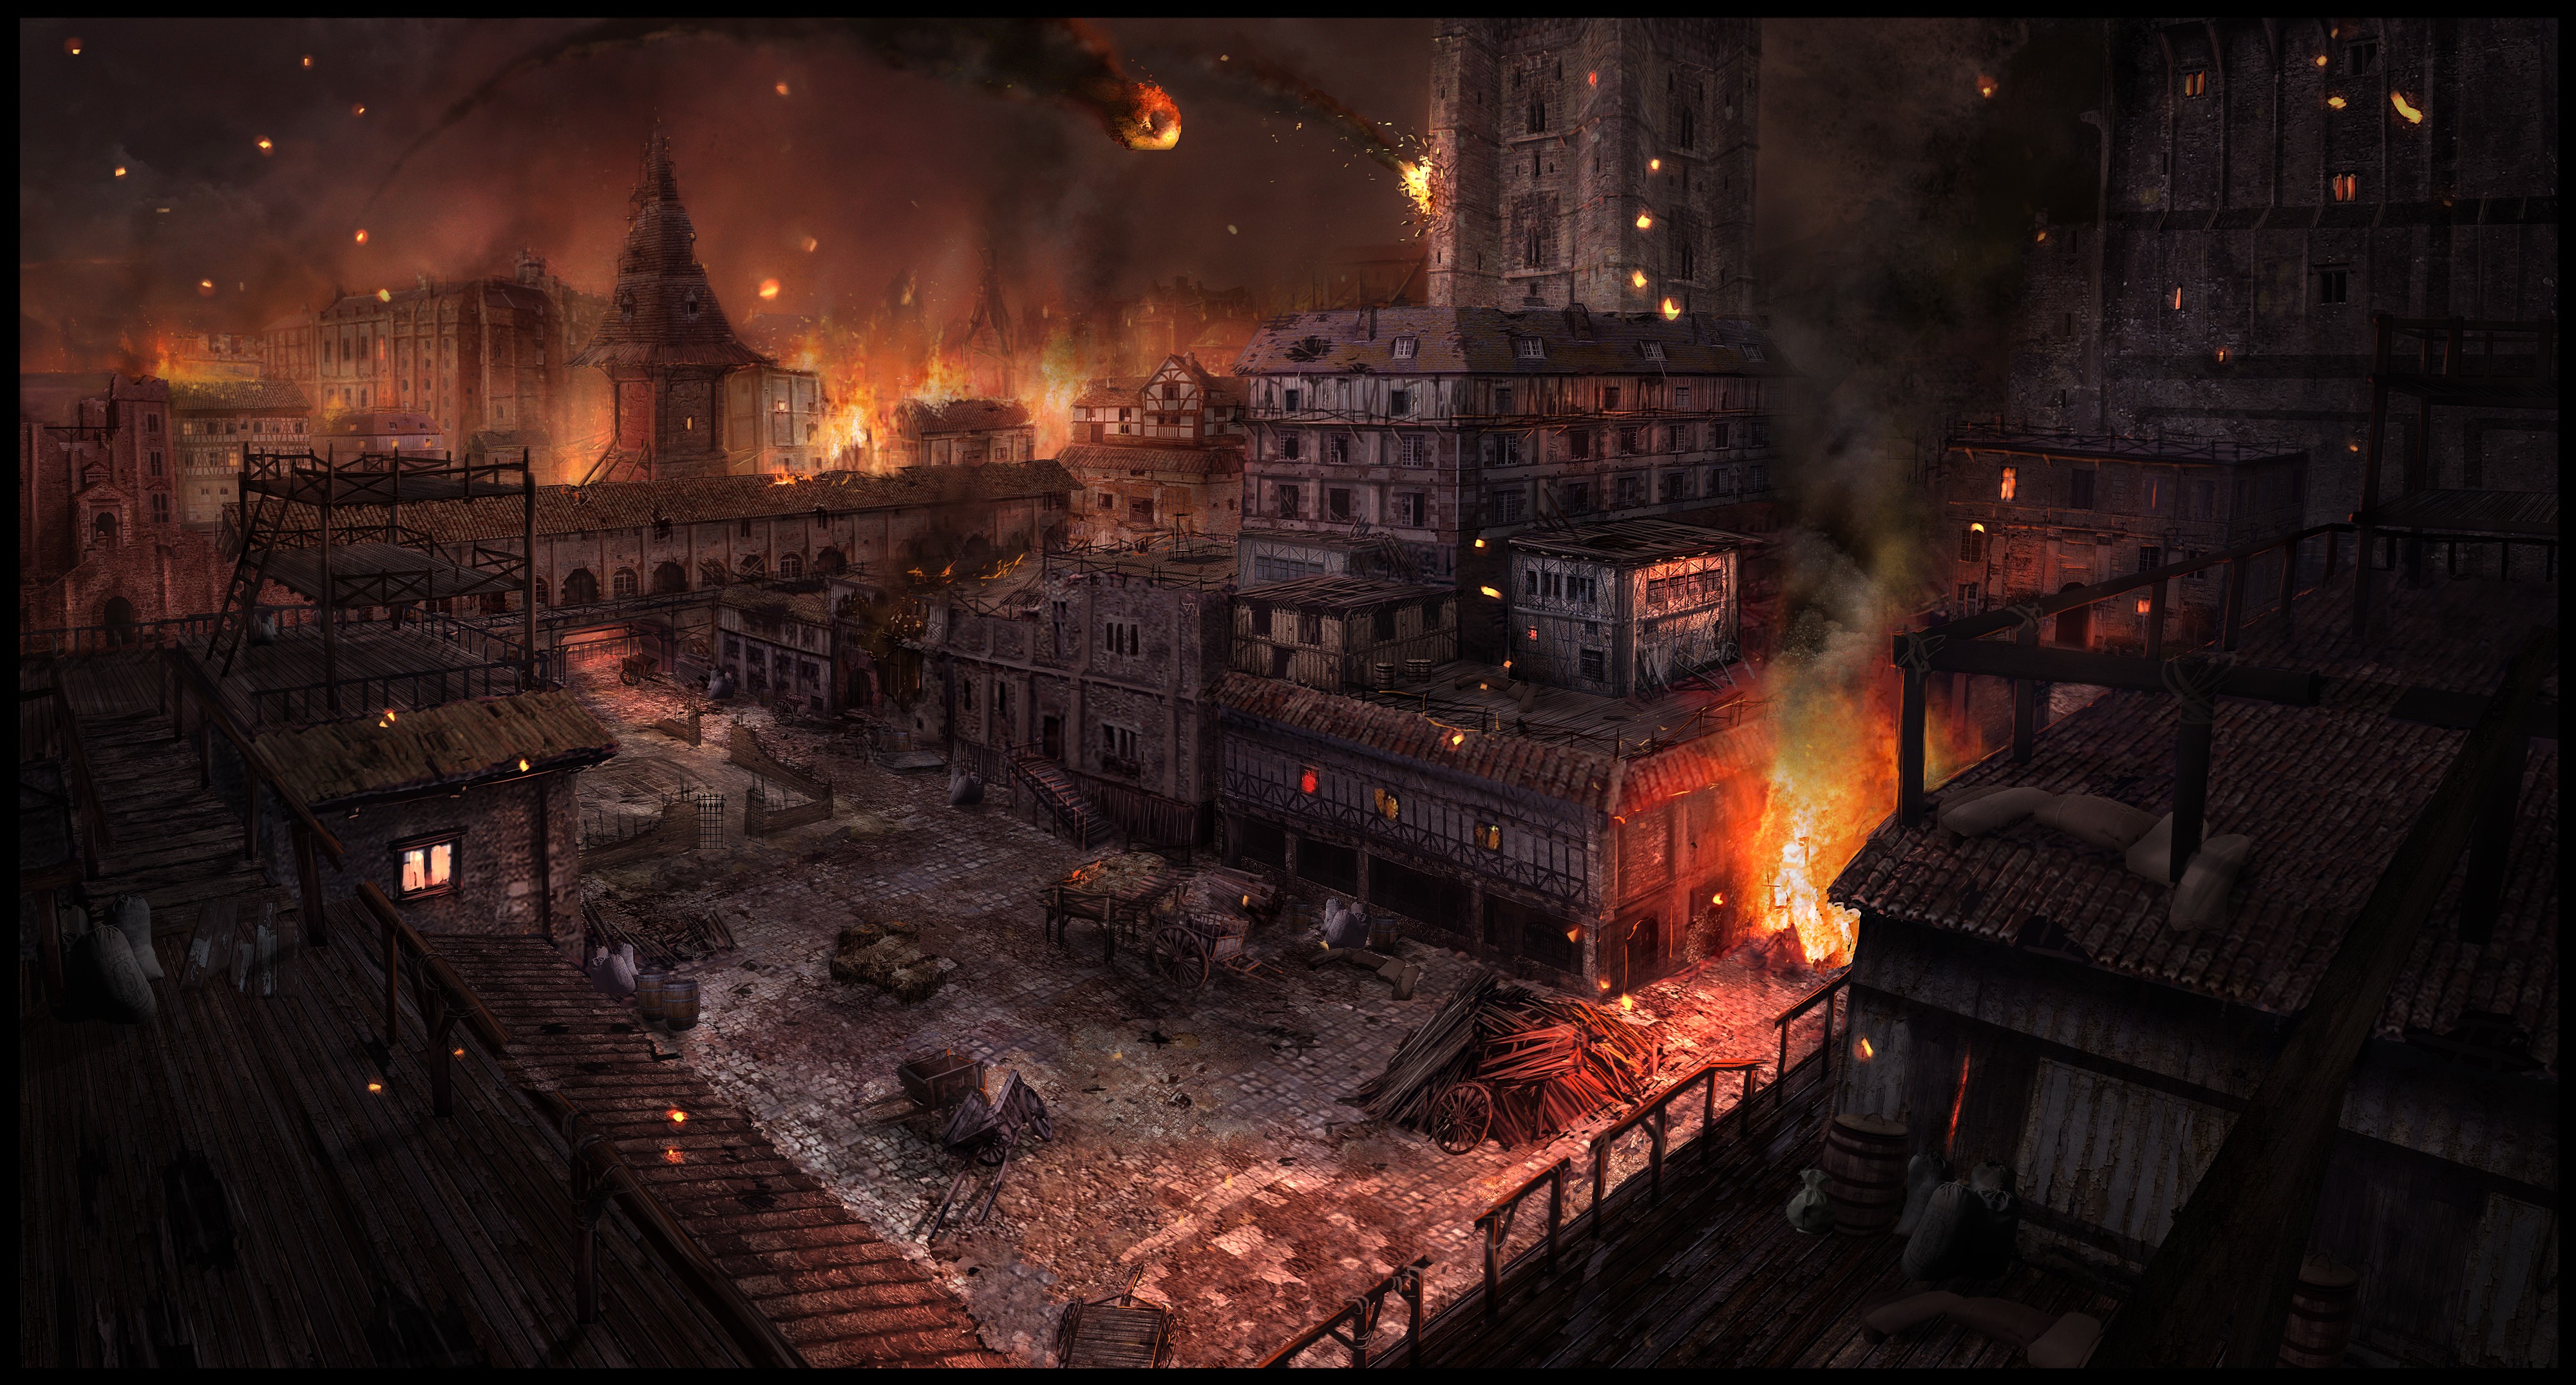 artwork, Video games, Hunted: The Demons Forge, City, Concept art Wallpaper